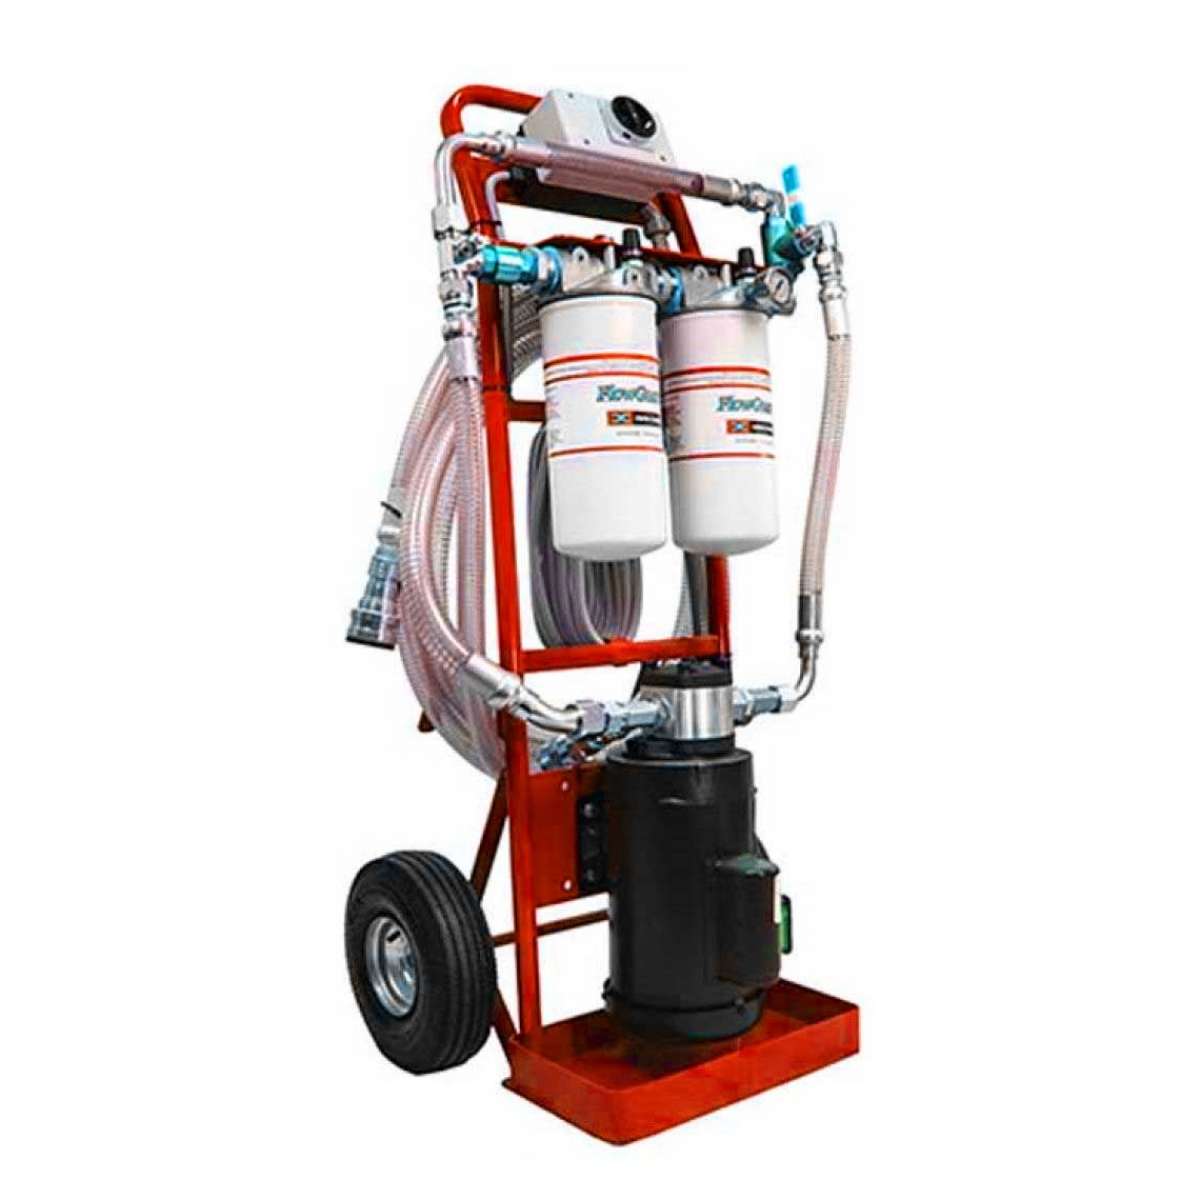 2 GPM 115 vac Dual Stage Filtration Cart 460 Viscosity - Red